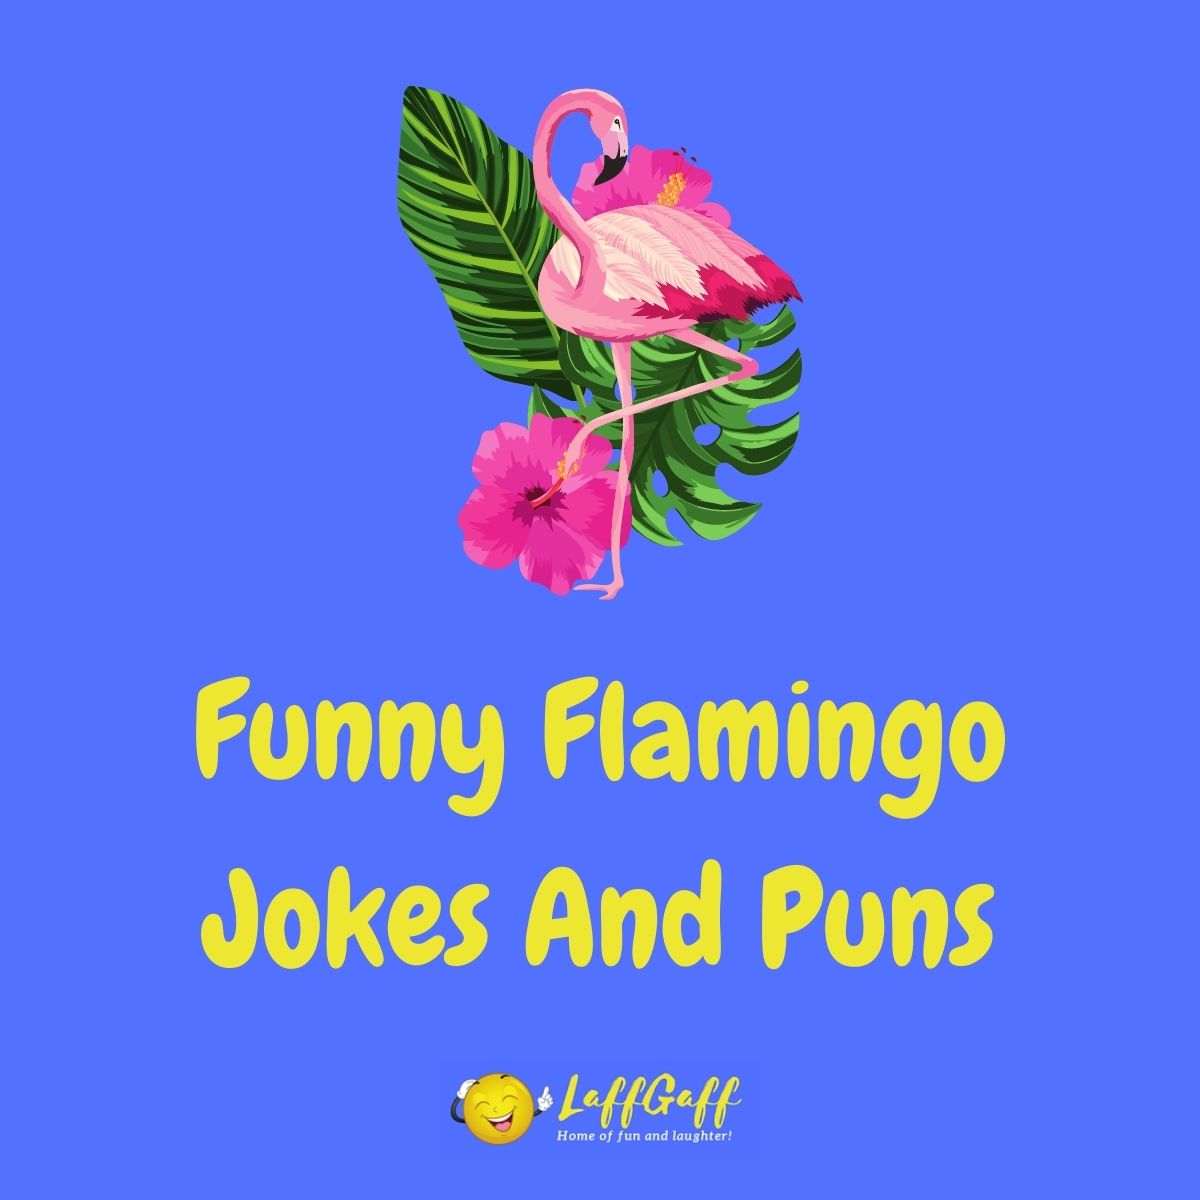 Featured image for a page of funny flamingo jokes and puns.